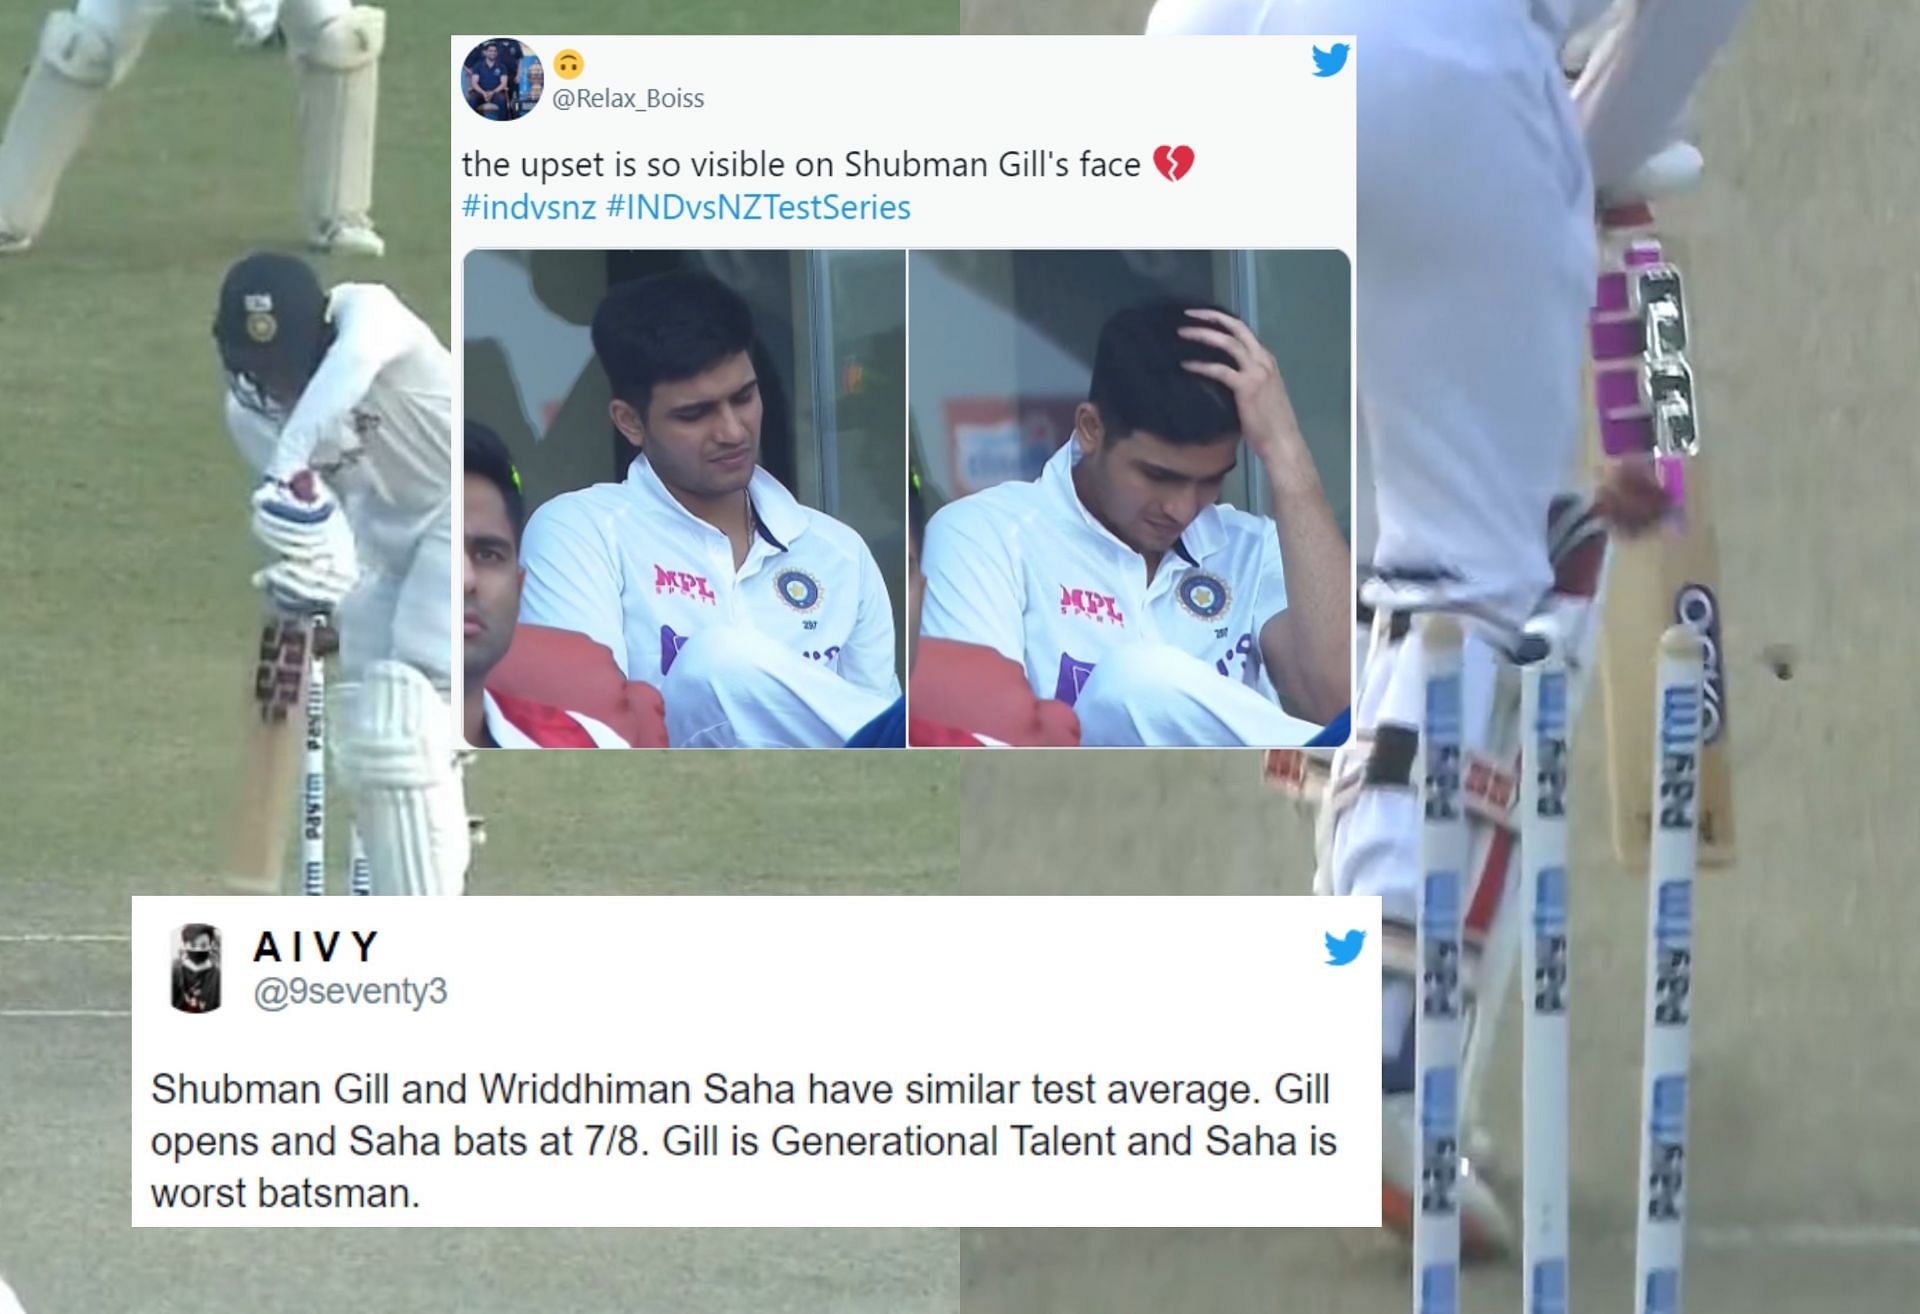 Fans were extremely disappointed with Shubman Gill after his dismissal in the second innings.